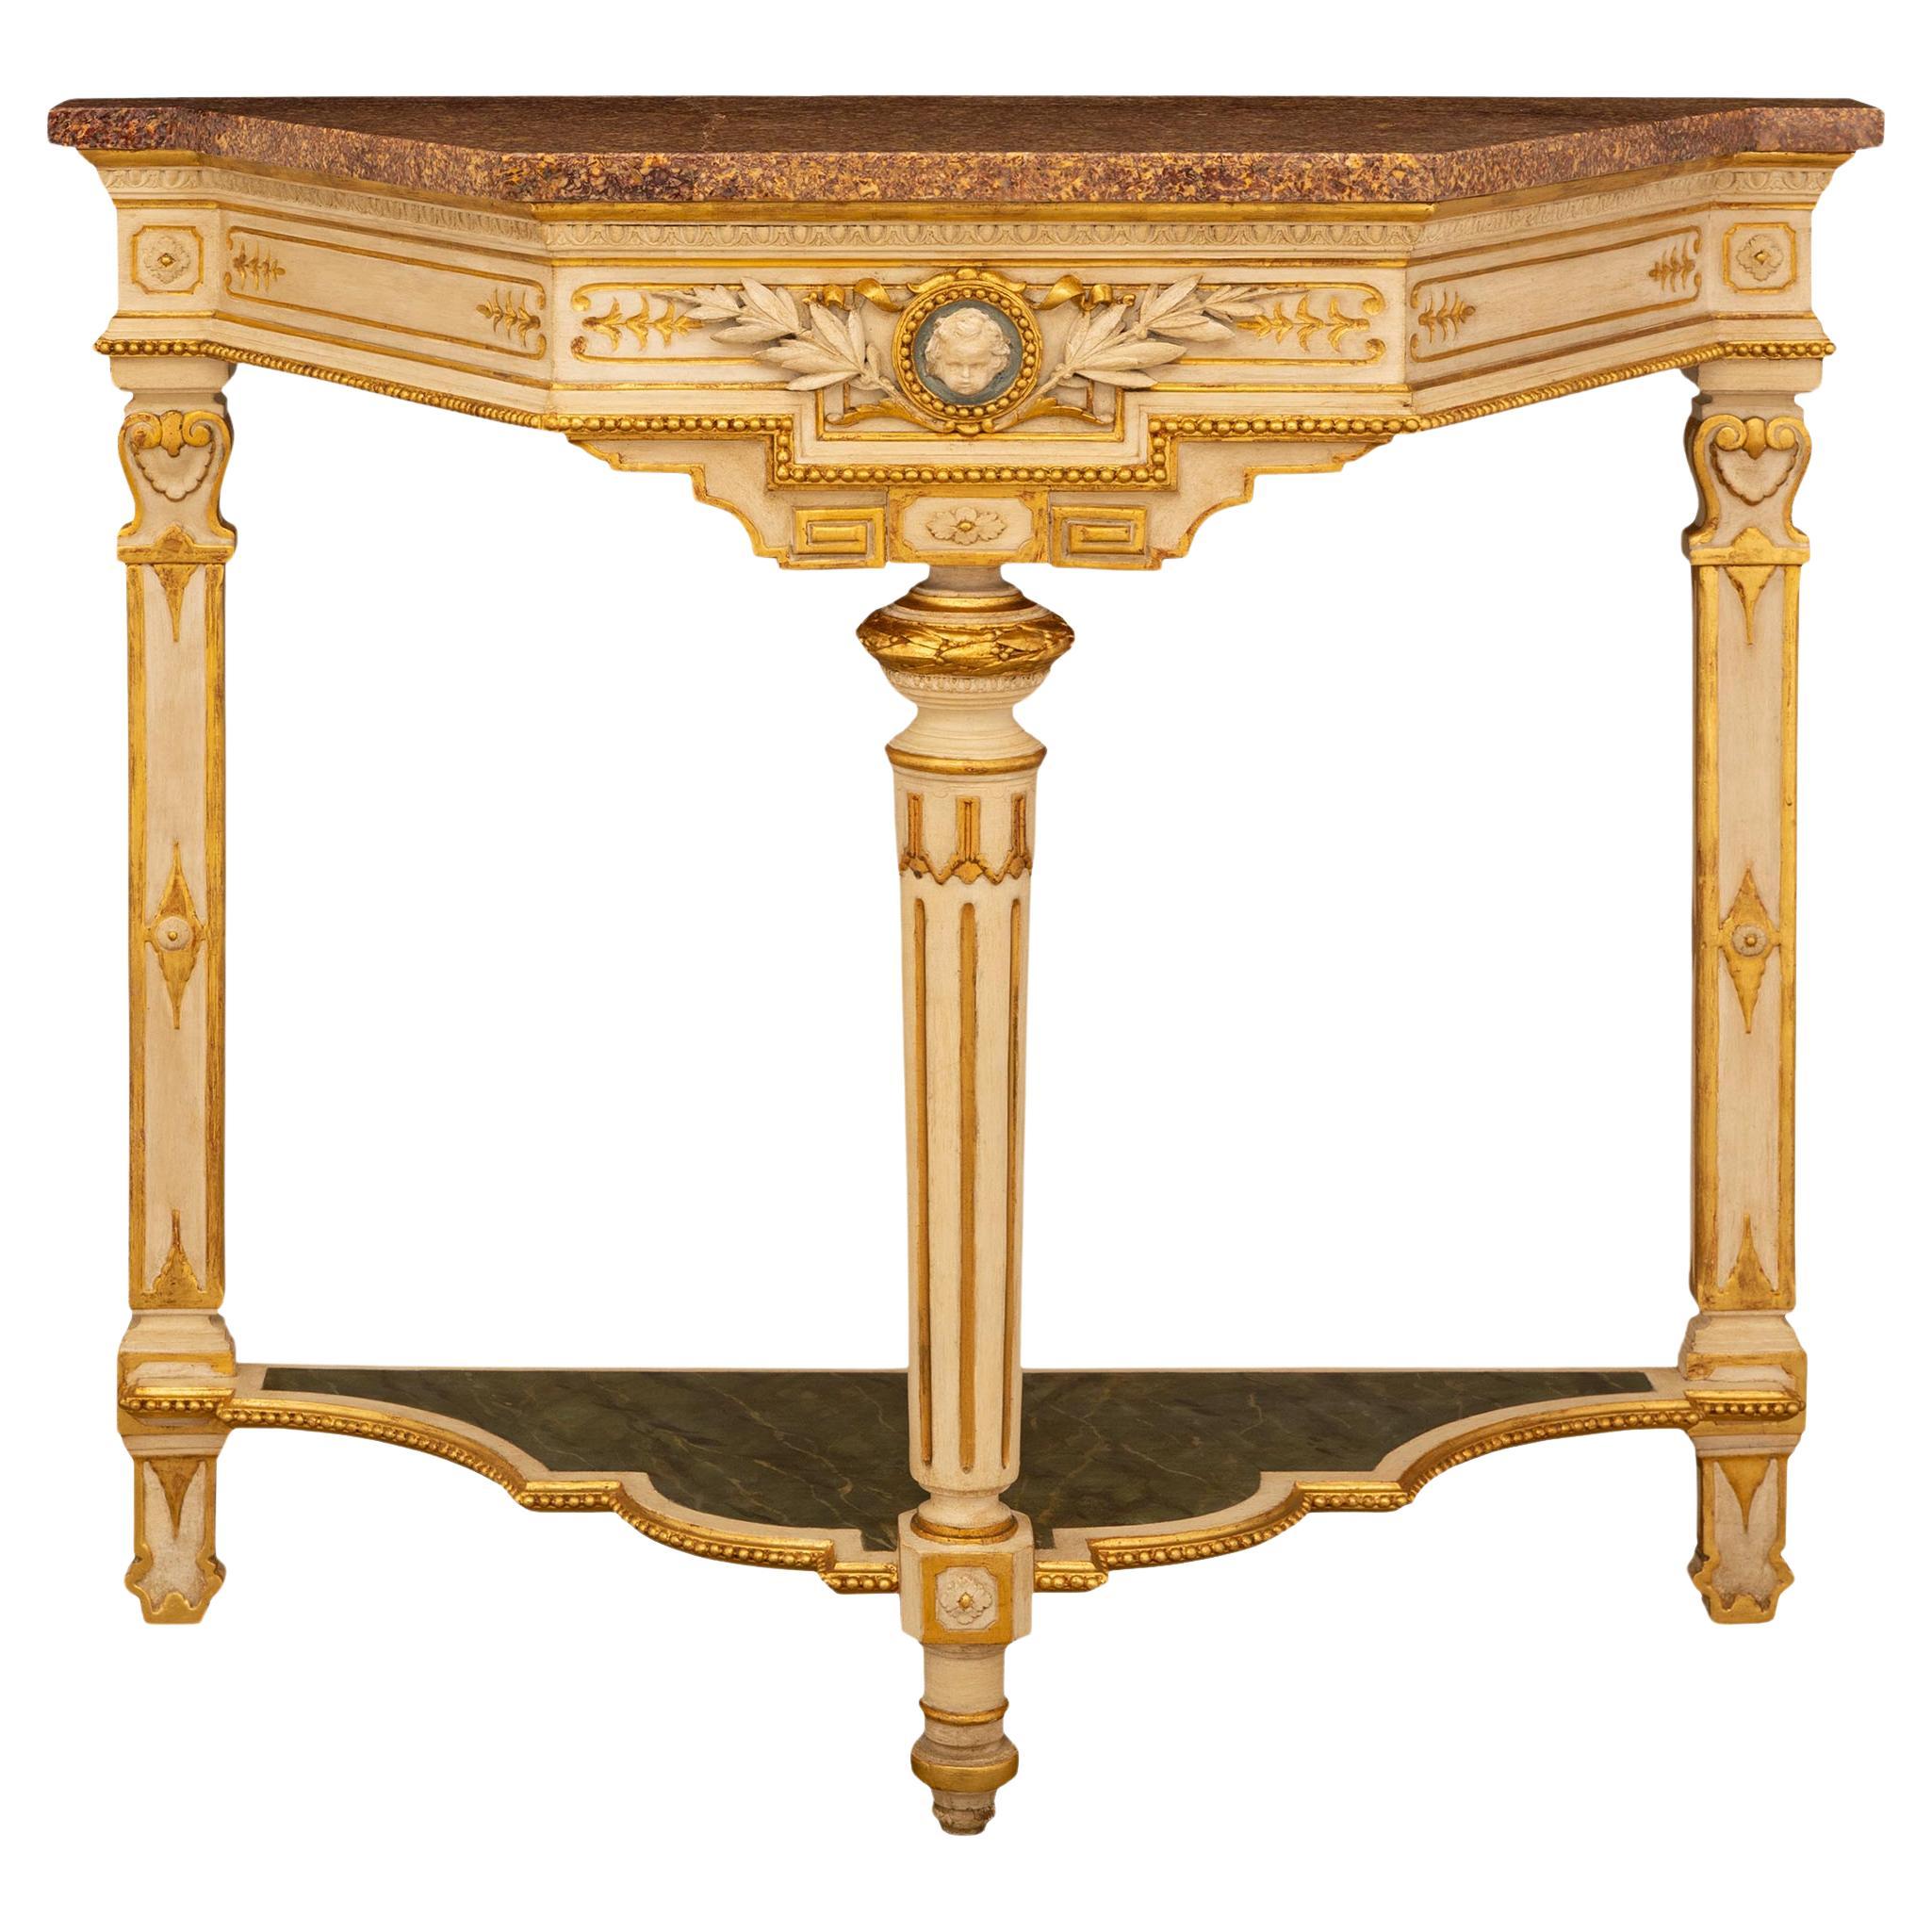 Italian 19th century Louis XVI st. Giltwood, patinated wood, and marble console